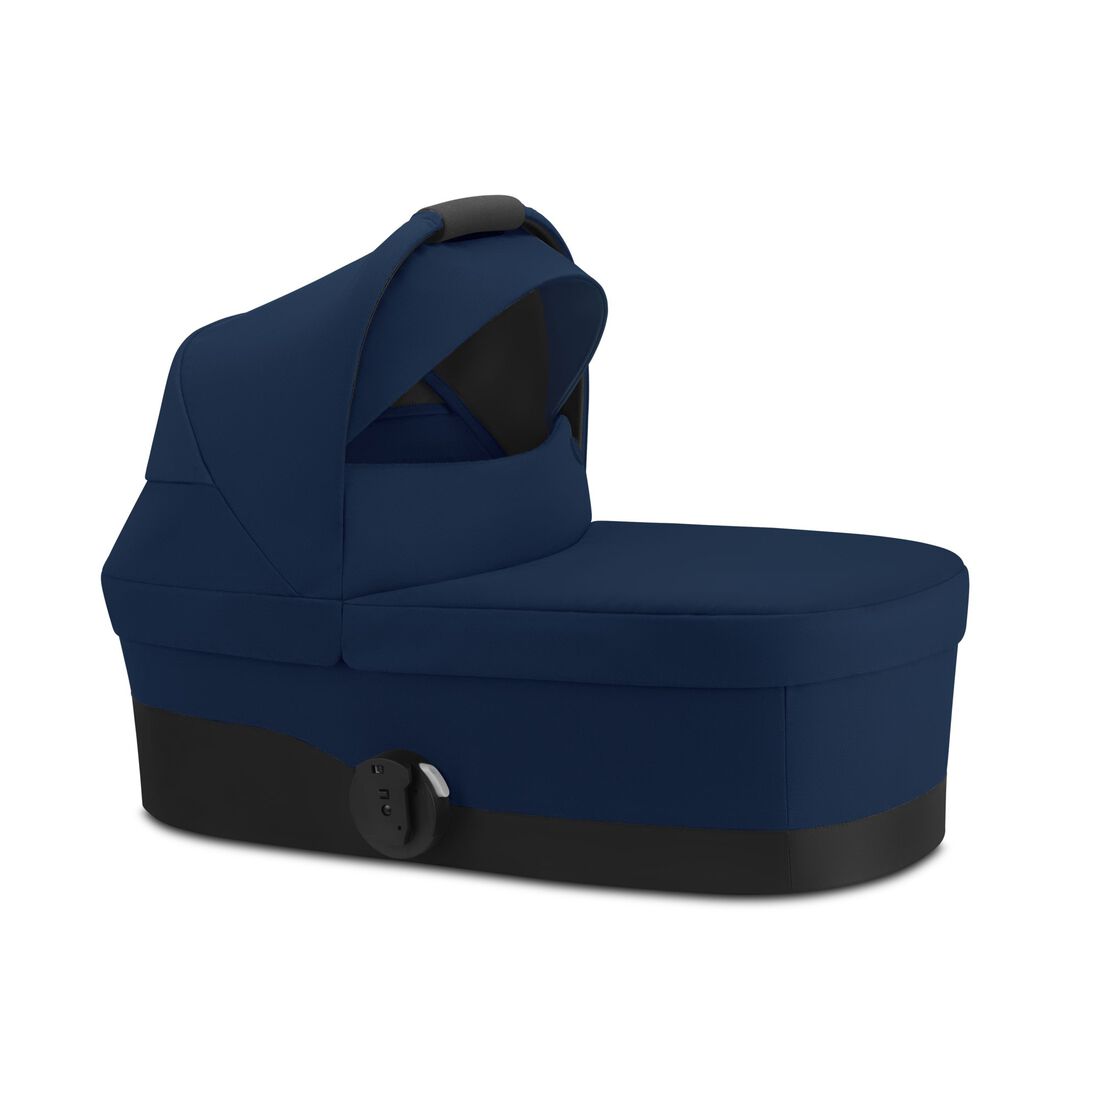 CYBEX Cot S - Navy Blue in Navy Blue large image number 2